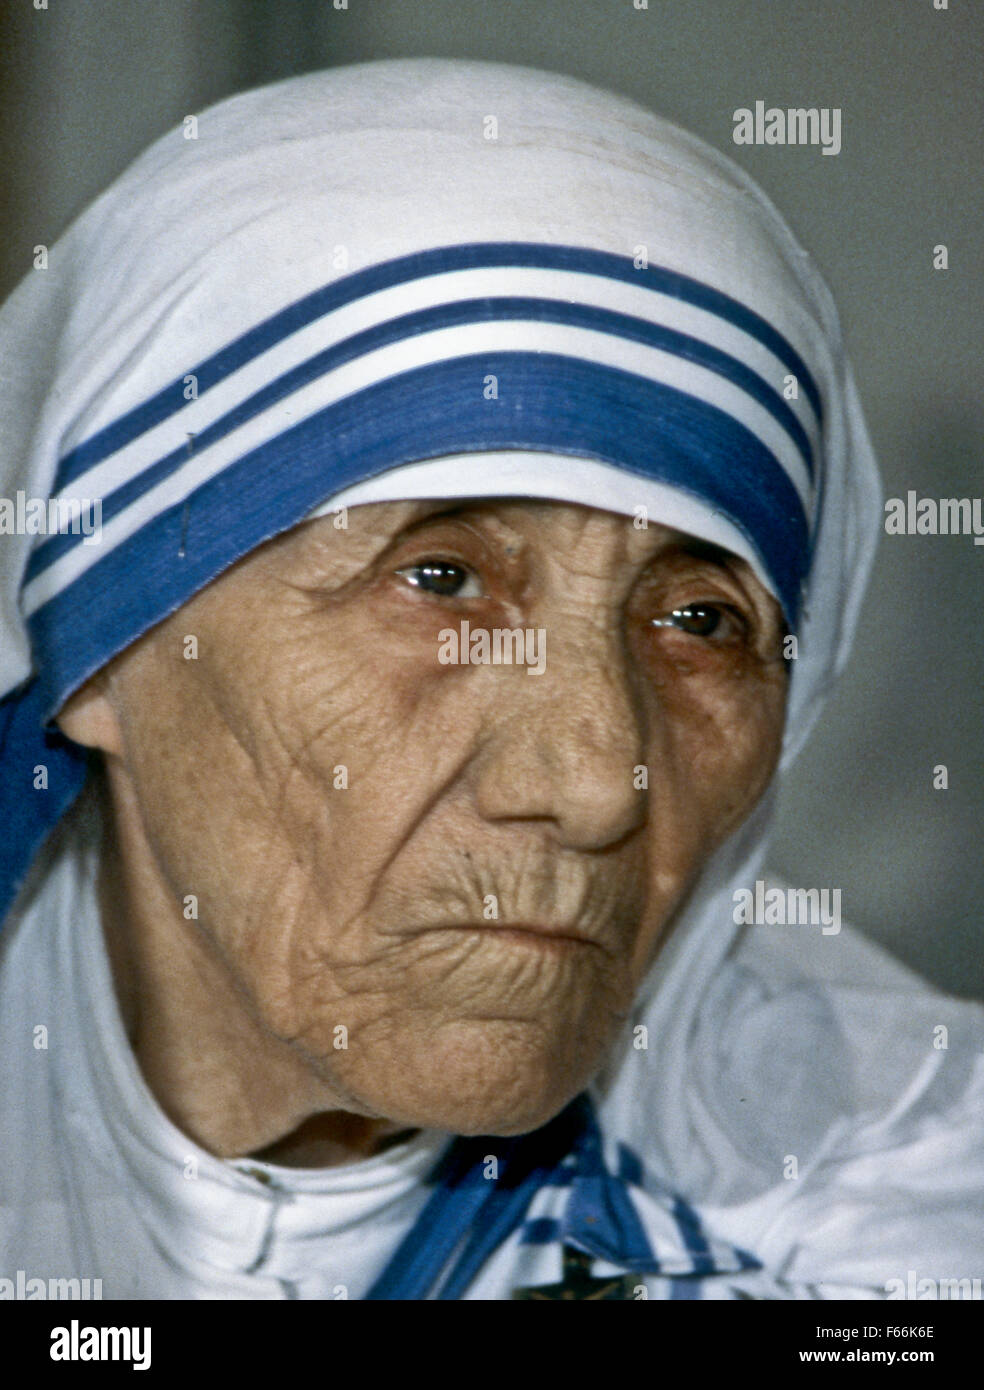 Washington, DC. 6-13-1986 Blessed Teresa of Calcutta, commonly known as Mother Teresa  a Roman Catholic religious sister and missionary who lived most of her life in India. She was born in today's Macedonia, with her family being of Albanian descent originating in Kosovo. Mother Teresa founded the Missionaries of Charity, a Roman Catholic religious congregation. Credit: Mark Reinstein Stock Photo